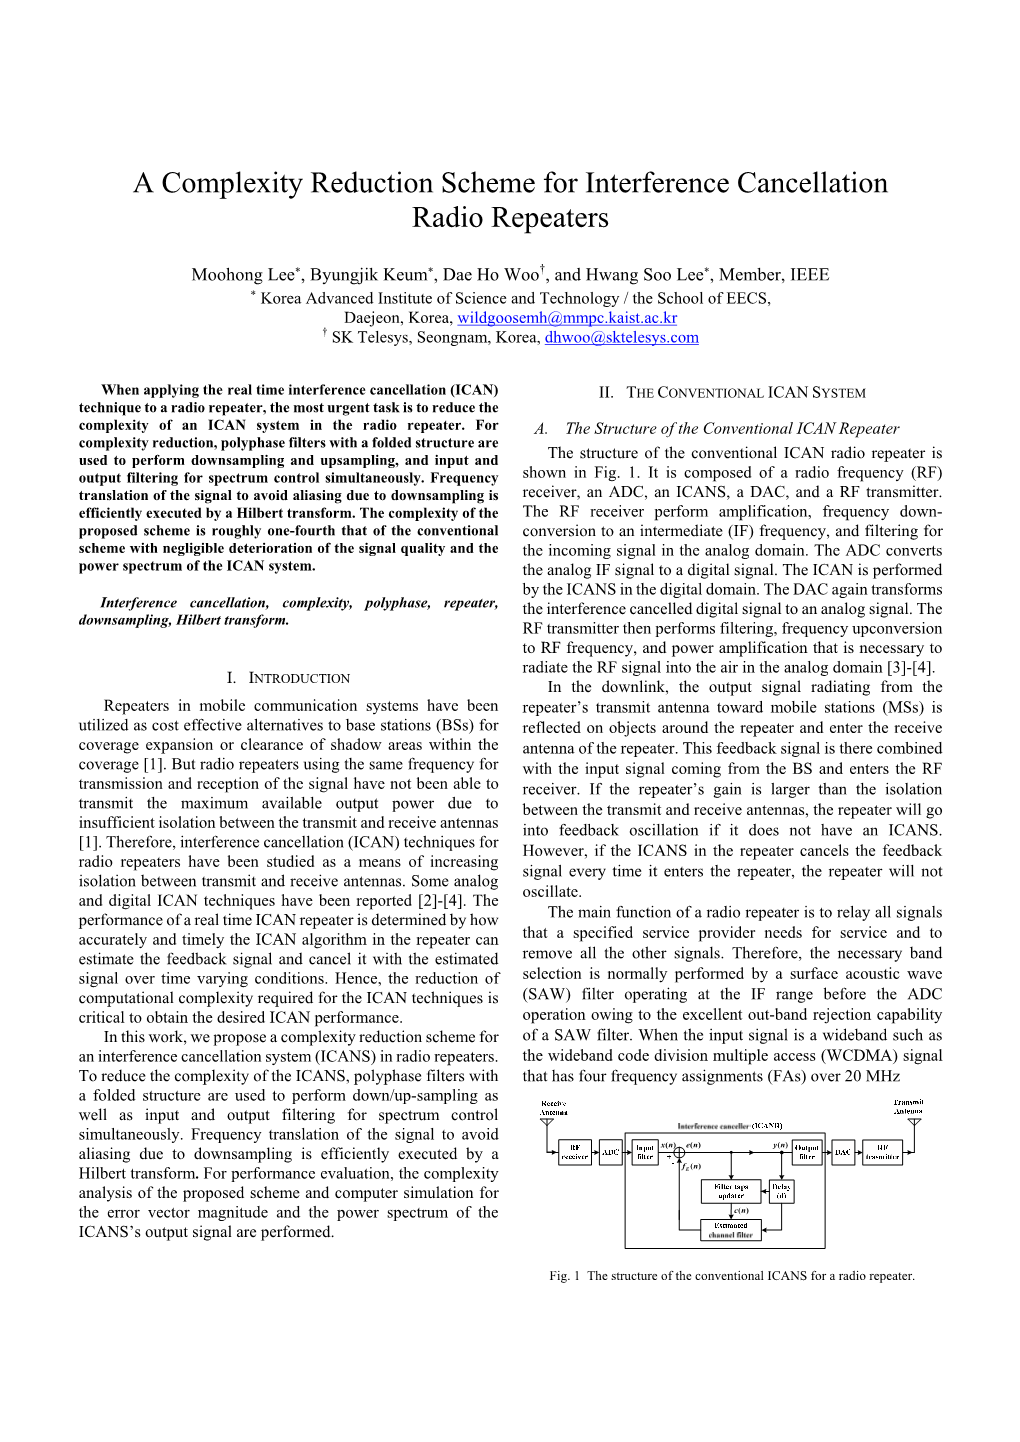 A Complexity Reduction Scheme for Interference Cancellation Radio Repeaters